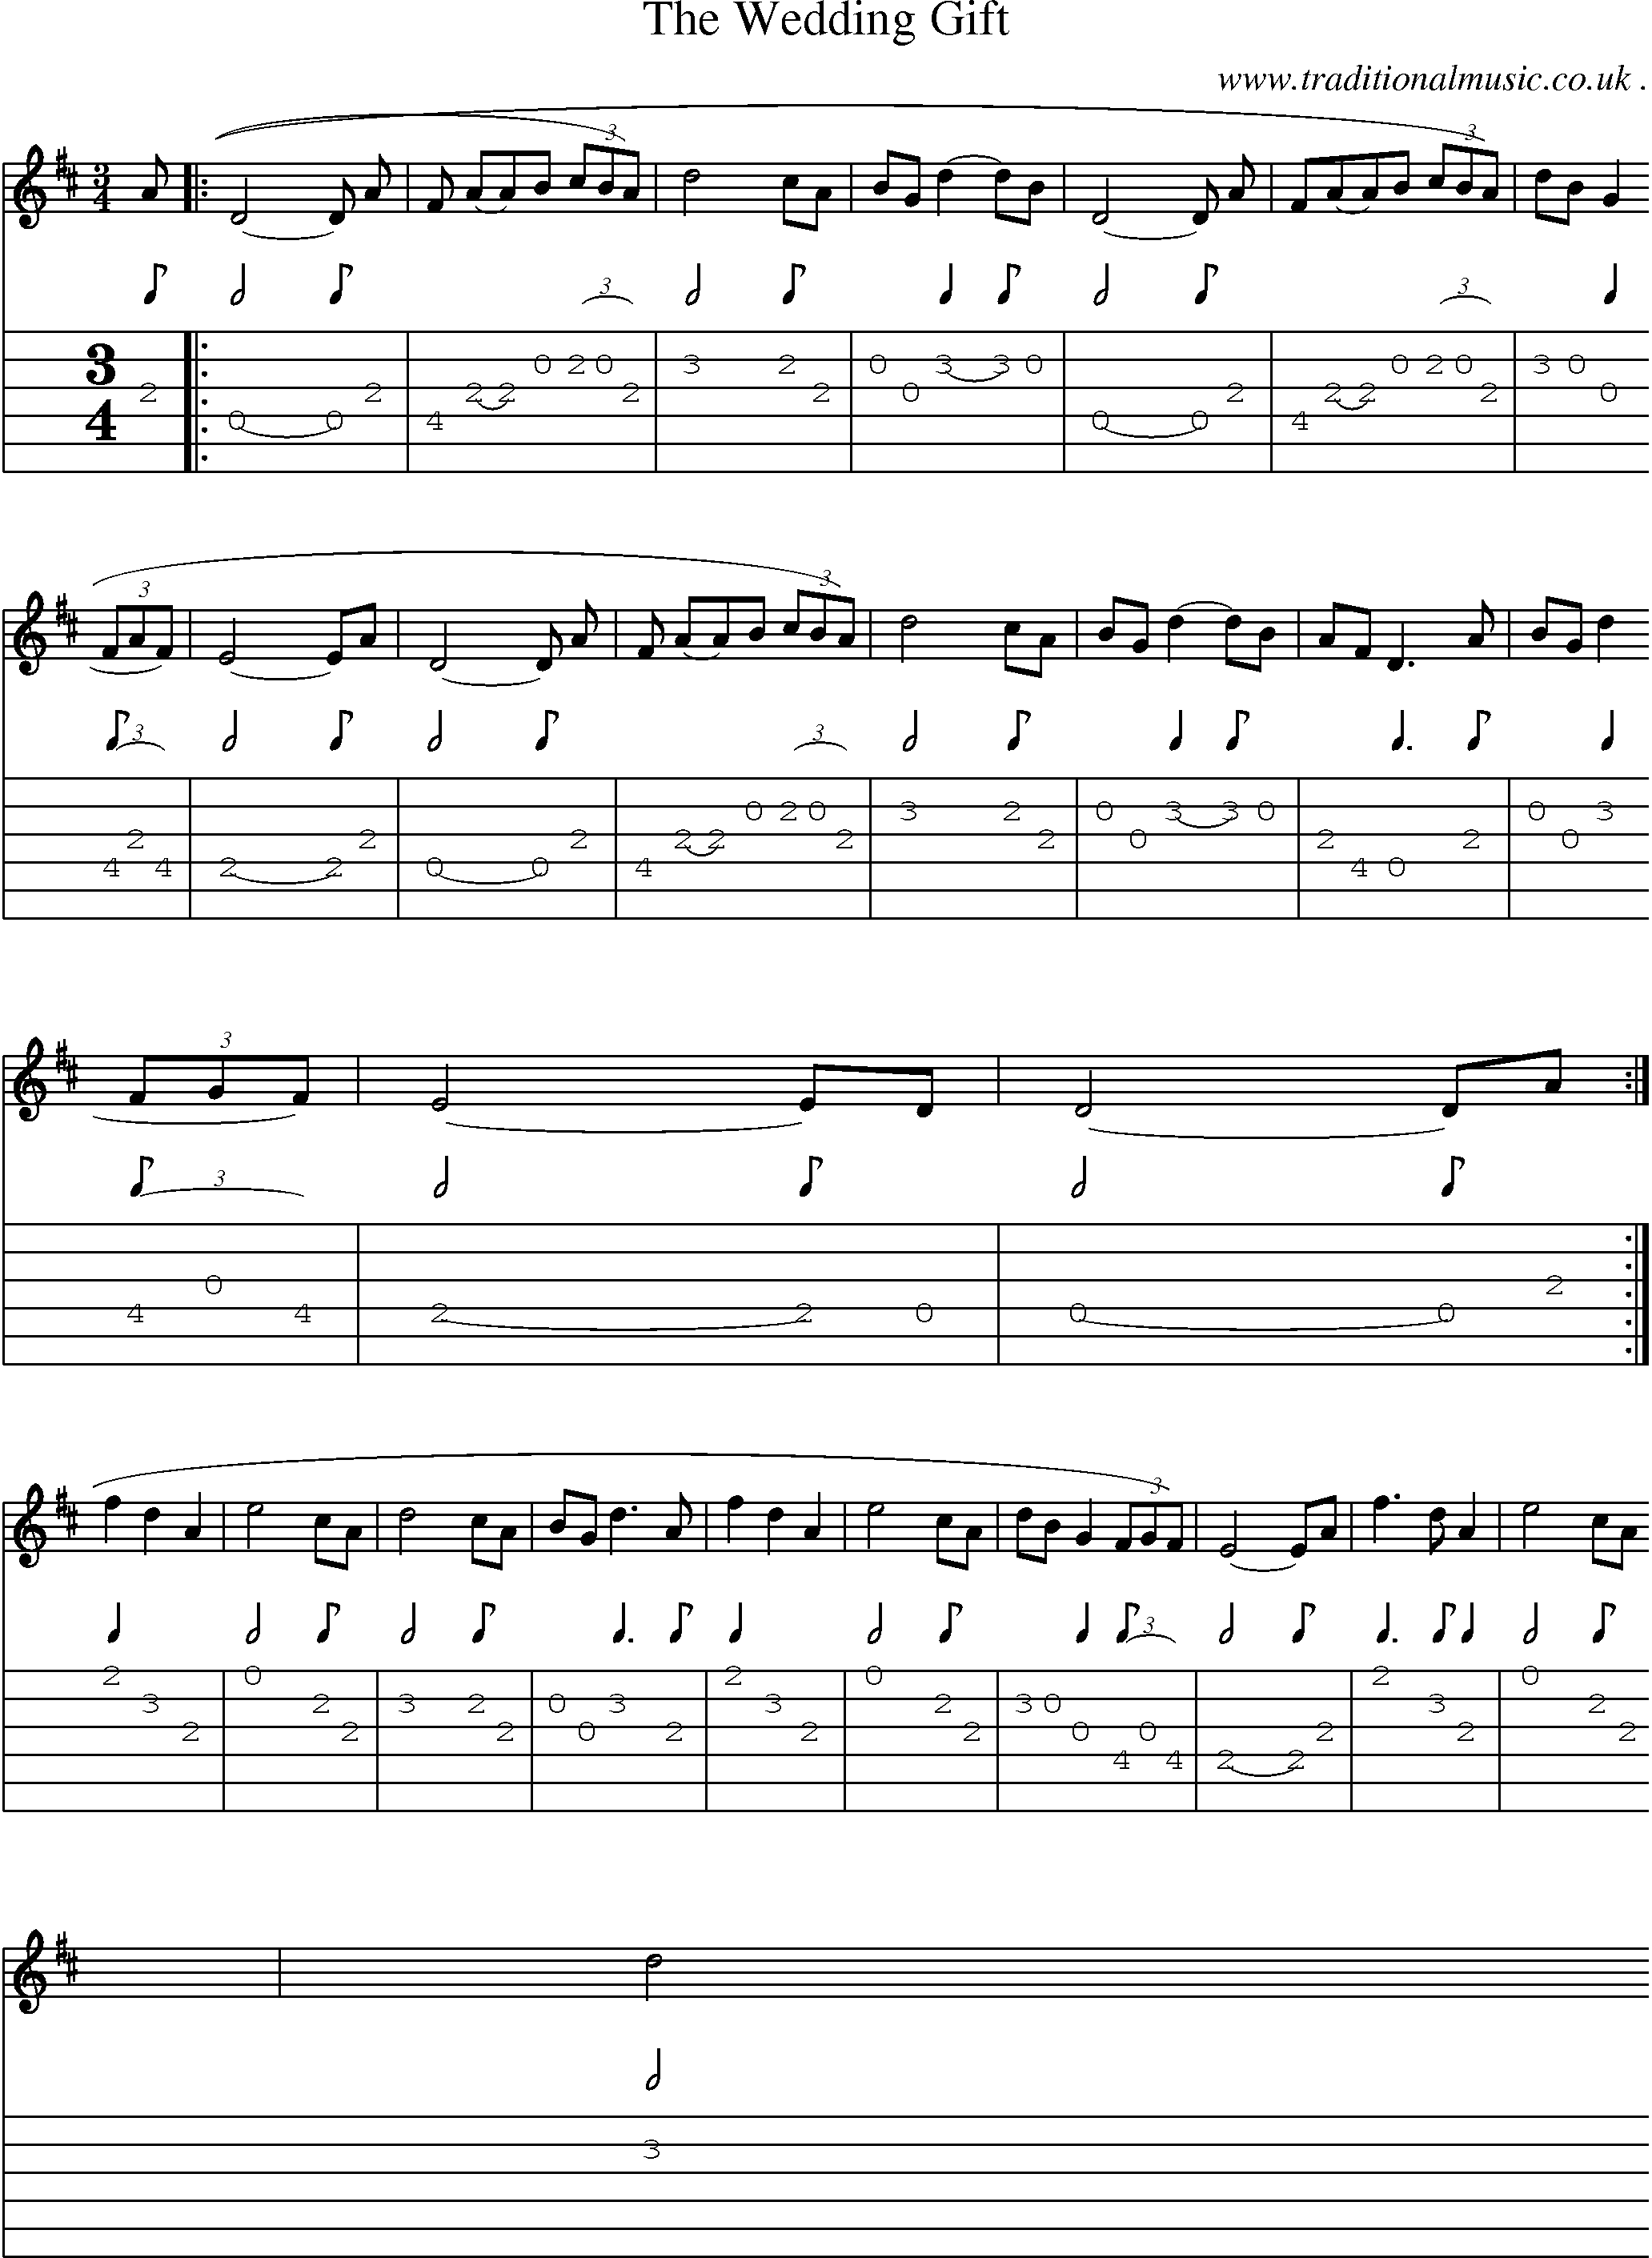 Sheet-Music and Guitar Tabs for The Wedding Gift